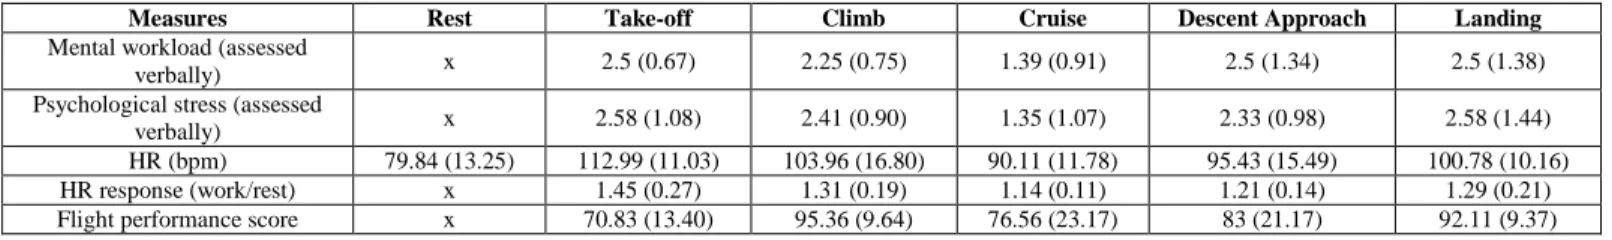 TABLE II.   C OMPARISON OF SUBJECTIVE ,  CARDIAC AND PERFORMANCE VARIABLES ACROSS THE FIVE FLIGHT PHASES 